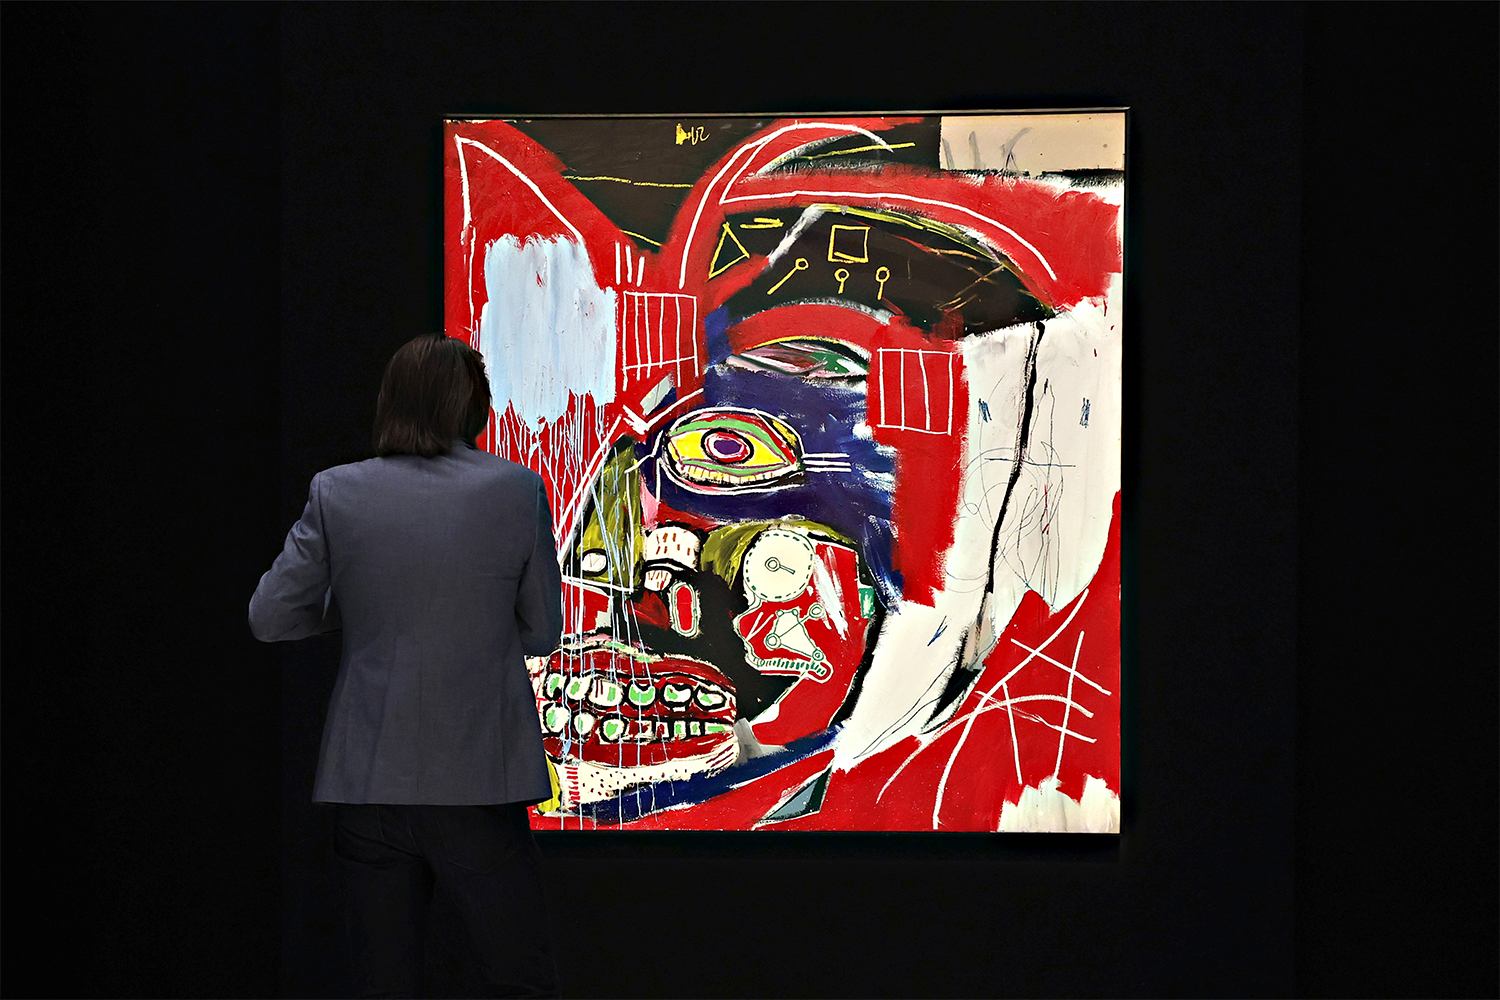 A person standing in front of “In This Case,” a painting by Jean-Michel Basquiat